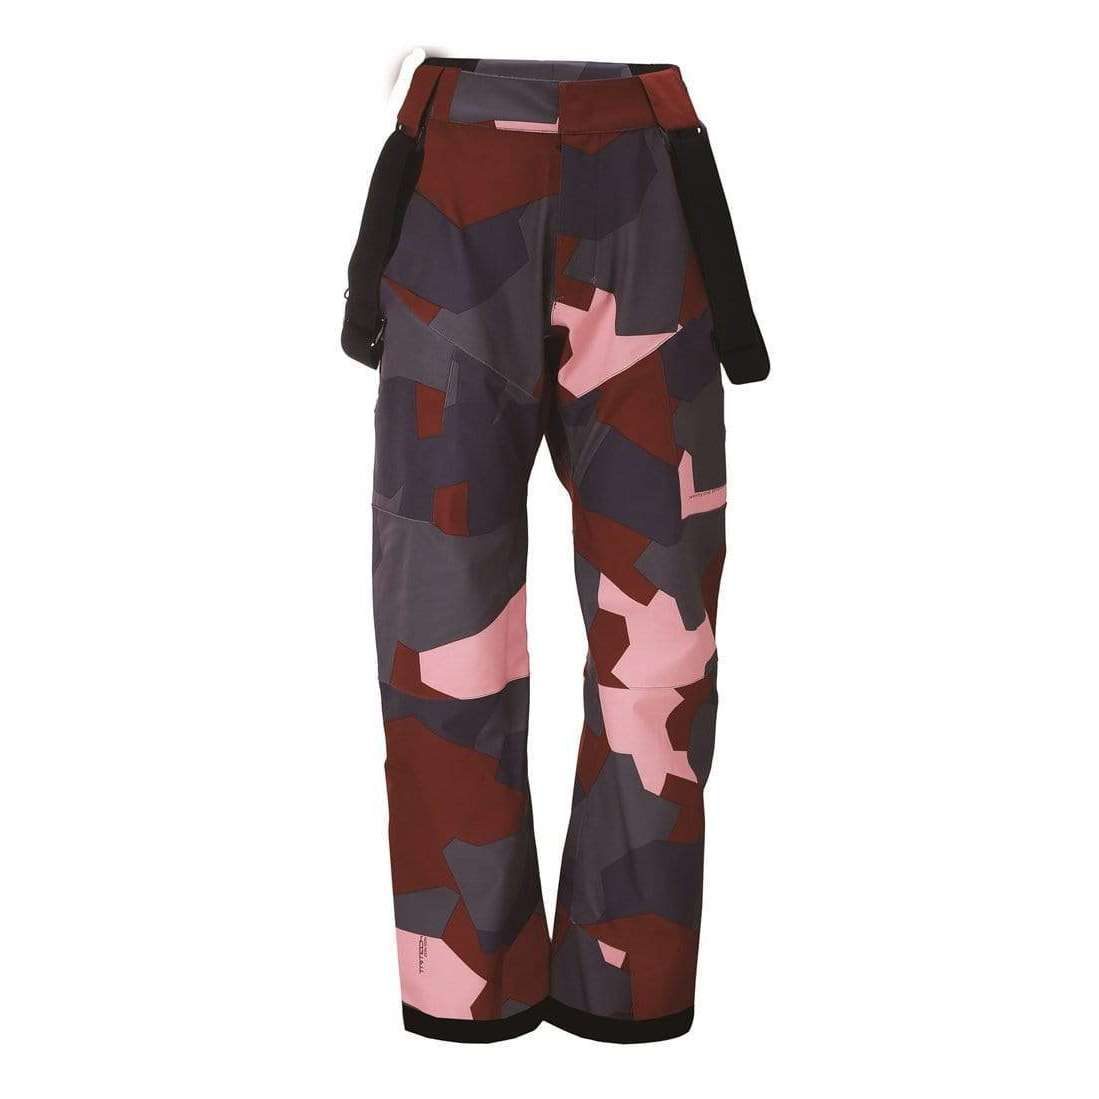 SnowKids Outerwear Pants 2117 Of Sweden Kids Lammhult Padded Ski Pant - Wine Red Camo